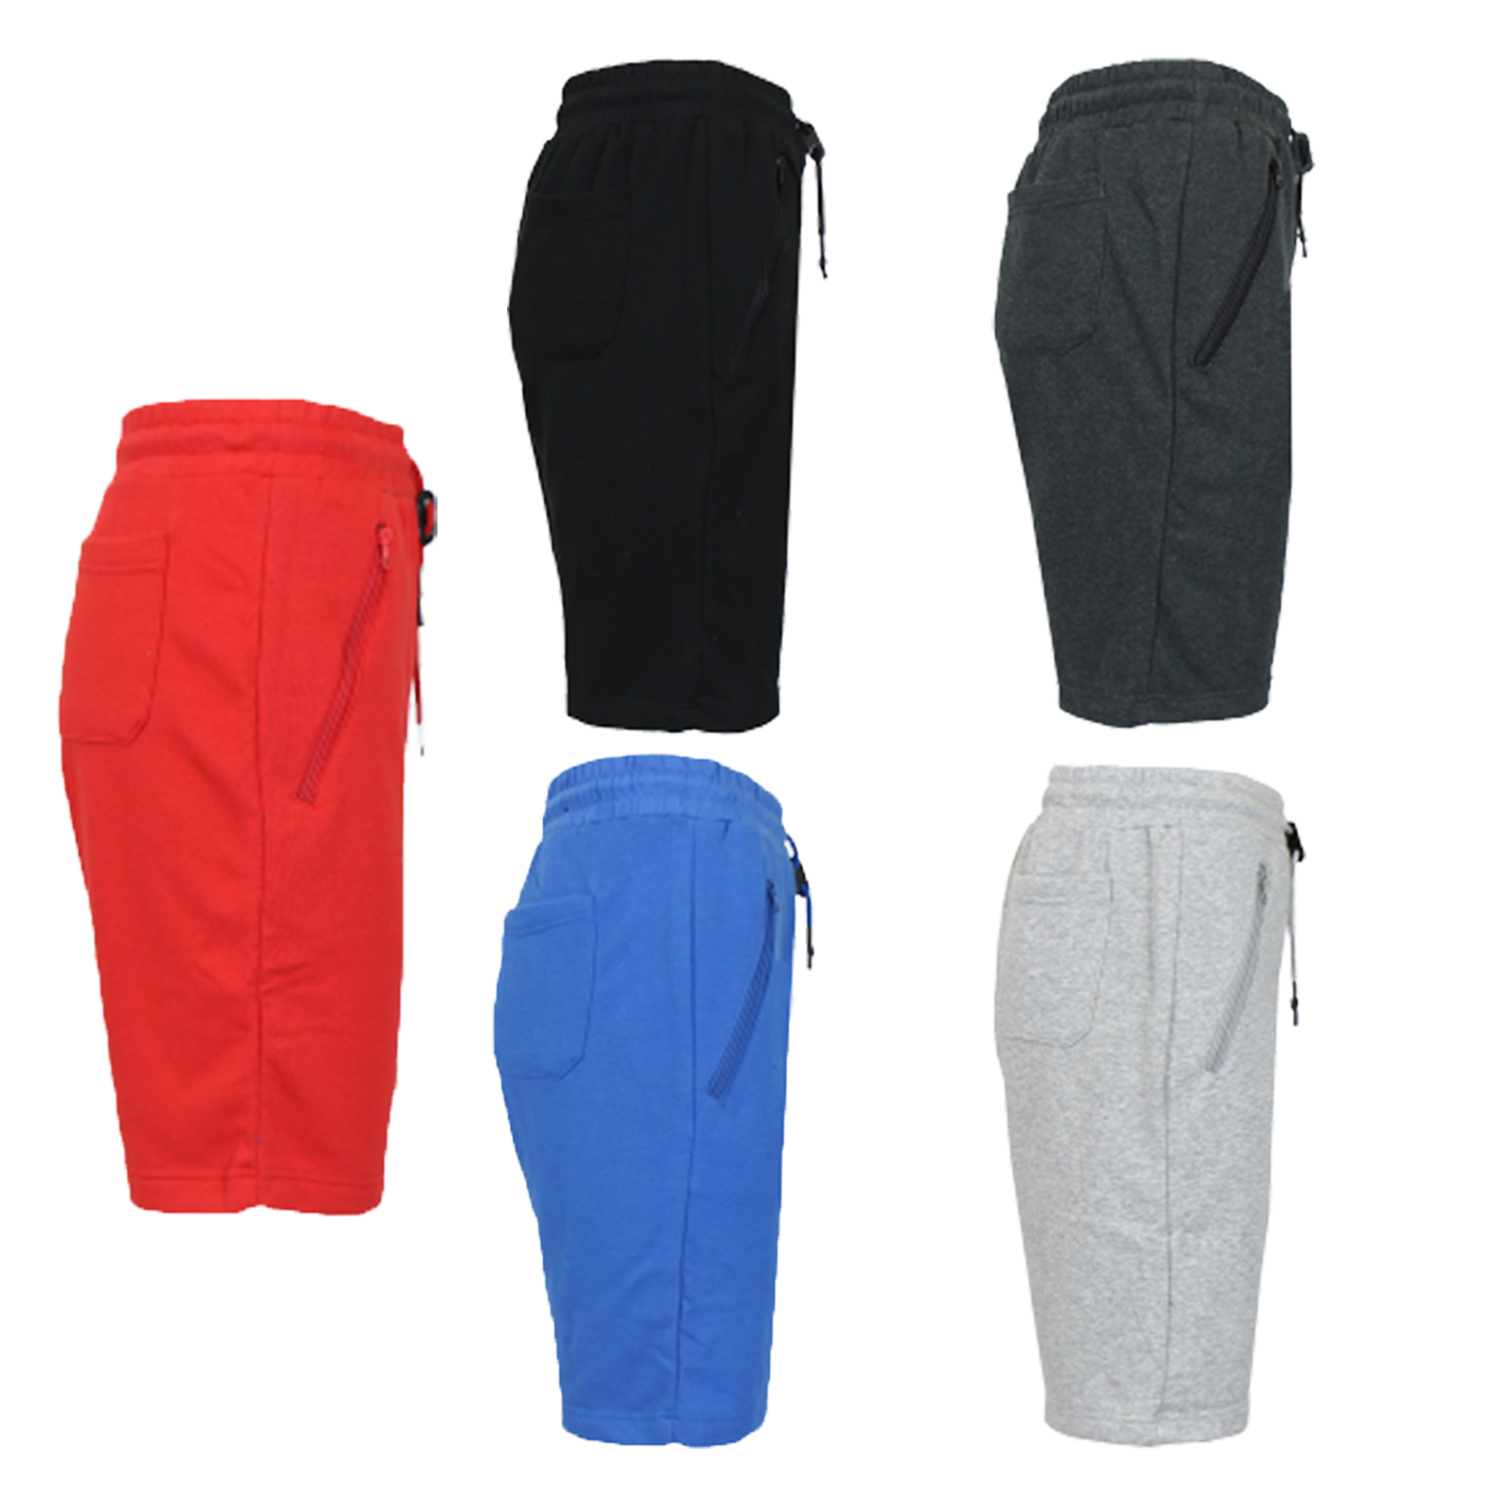 Men's Assorted French Terry Lounge Shorts - 3 Pack